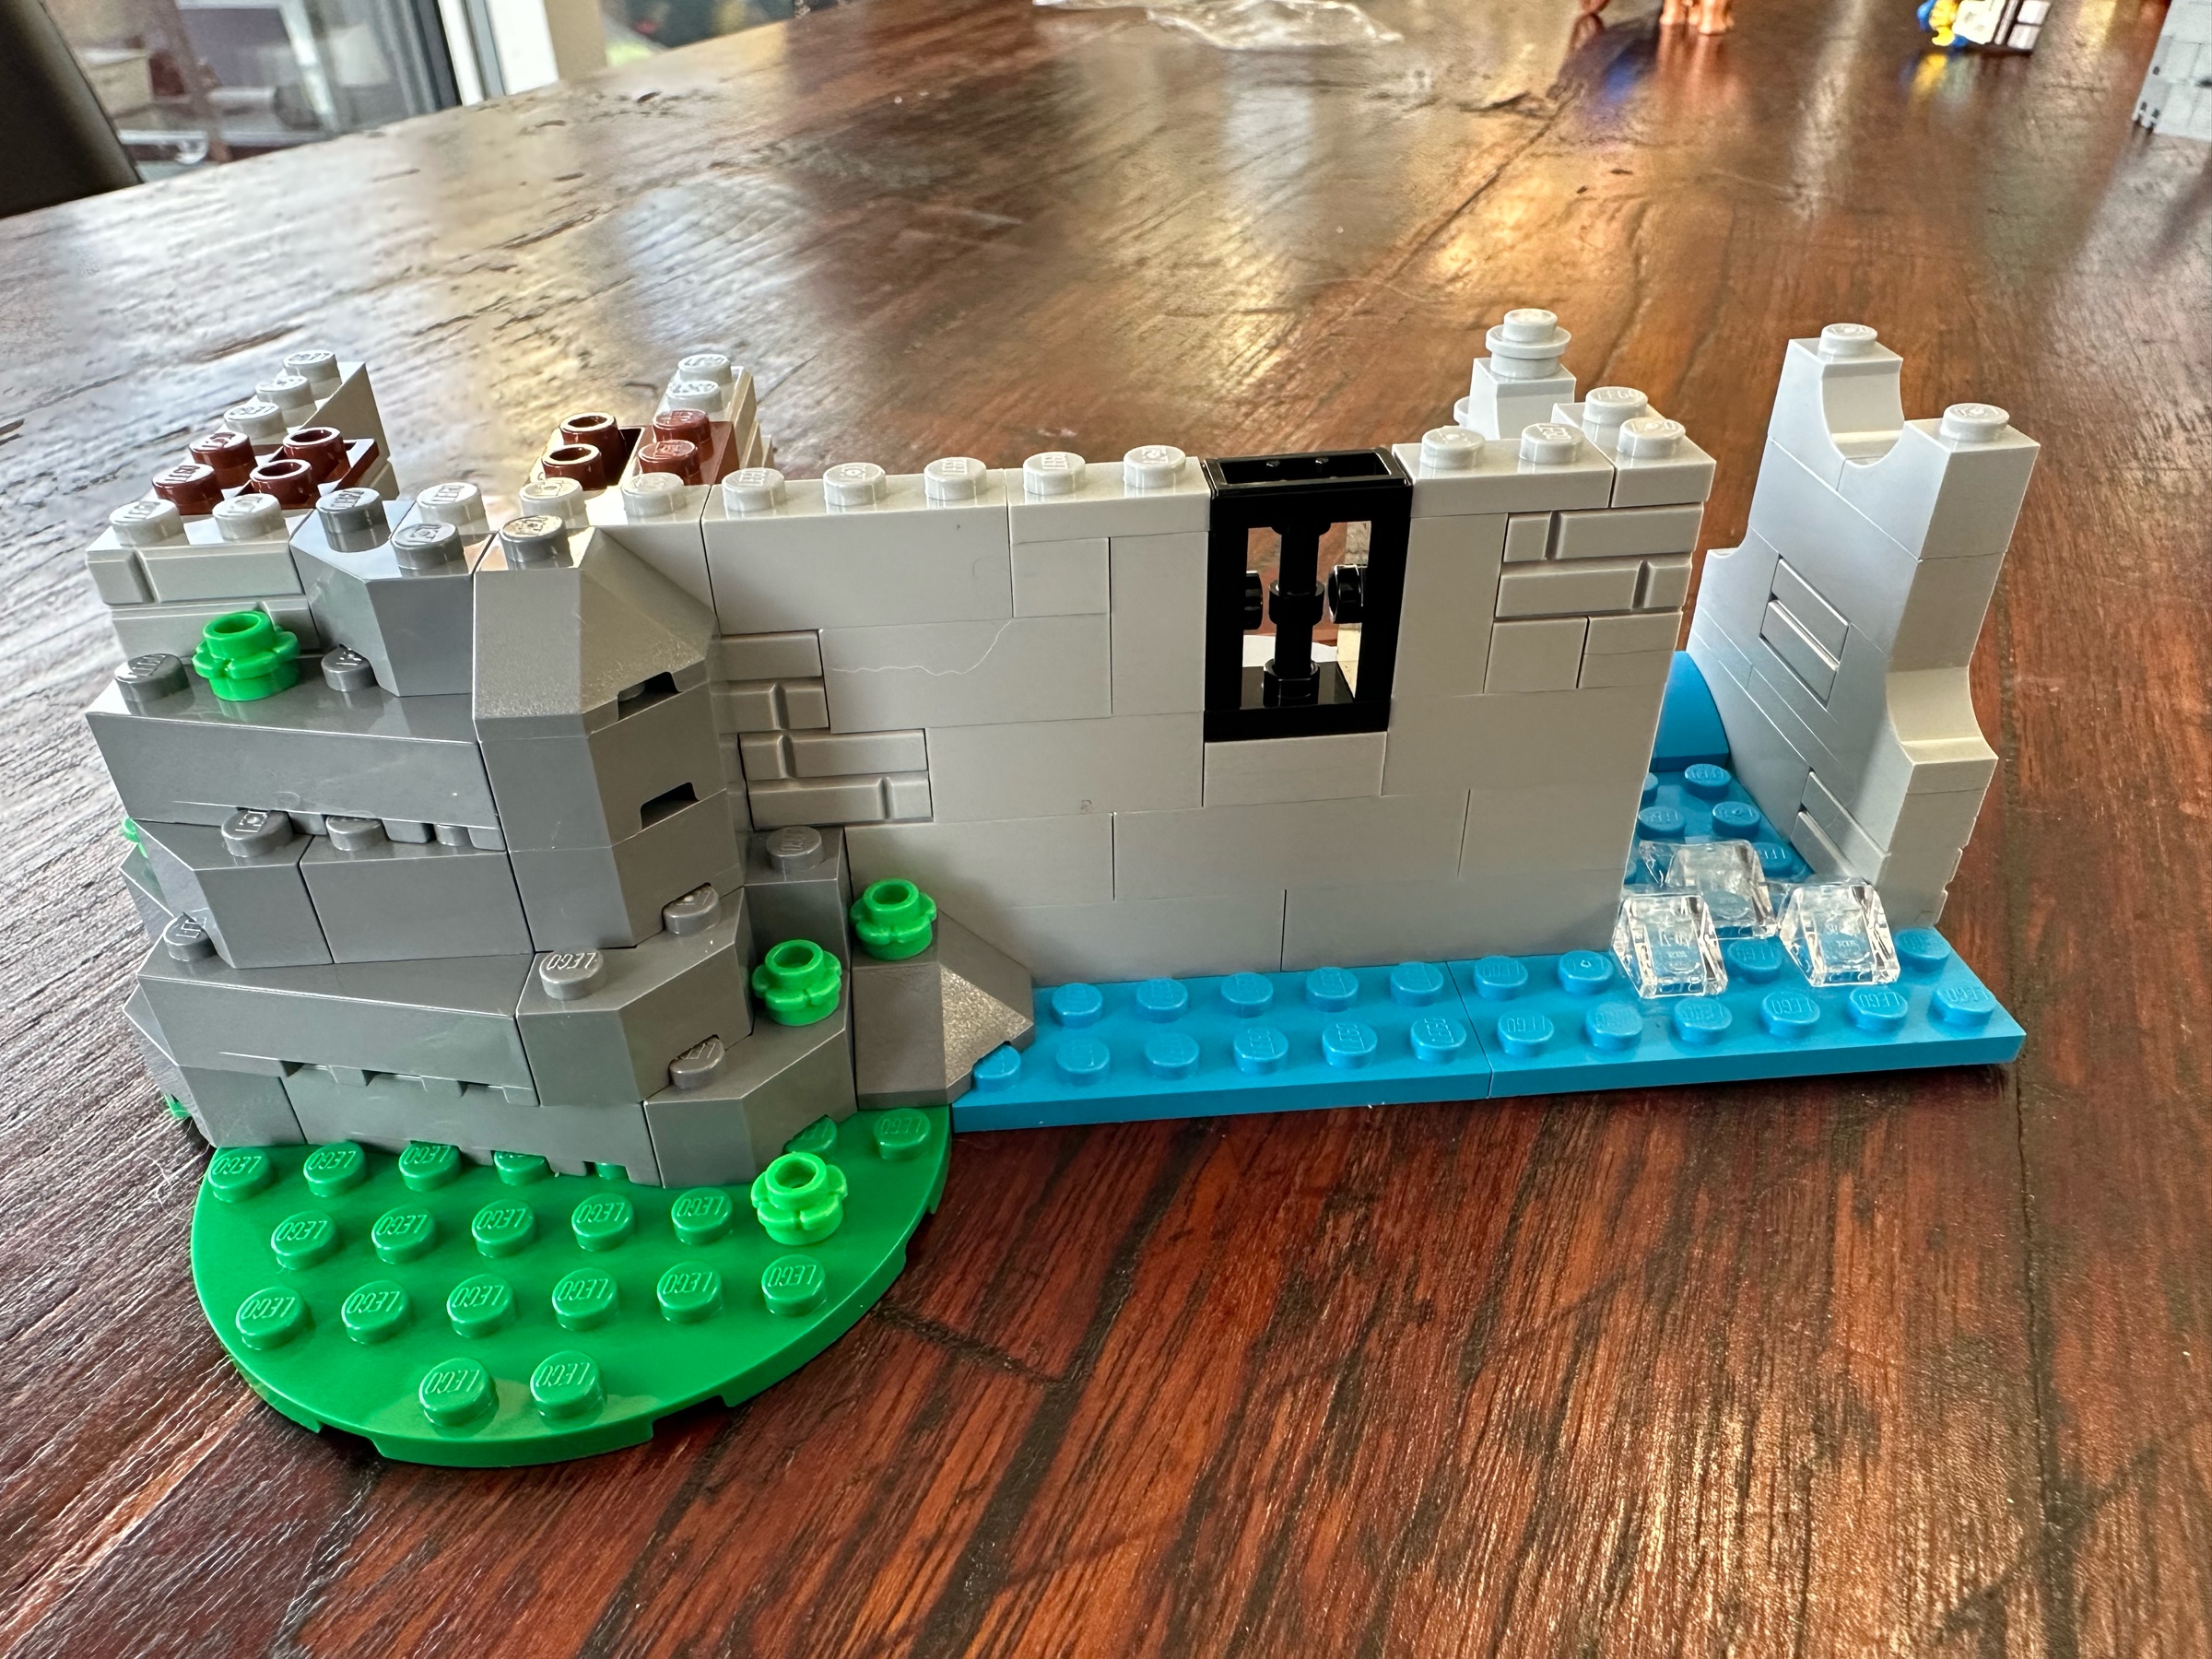 Exterior view of LEGO castle showing gray stone walls, a bit of greenery on the left, and a flowing stream with a few rapids on the right.